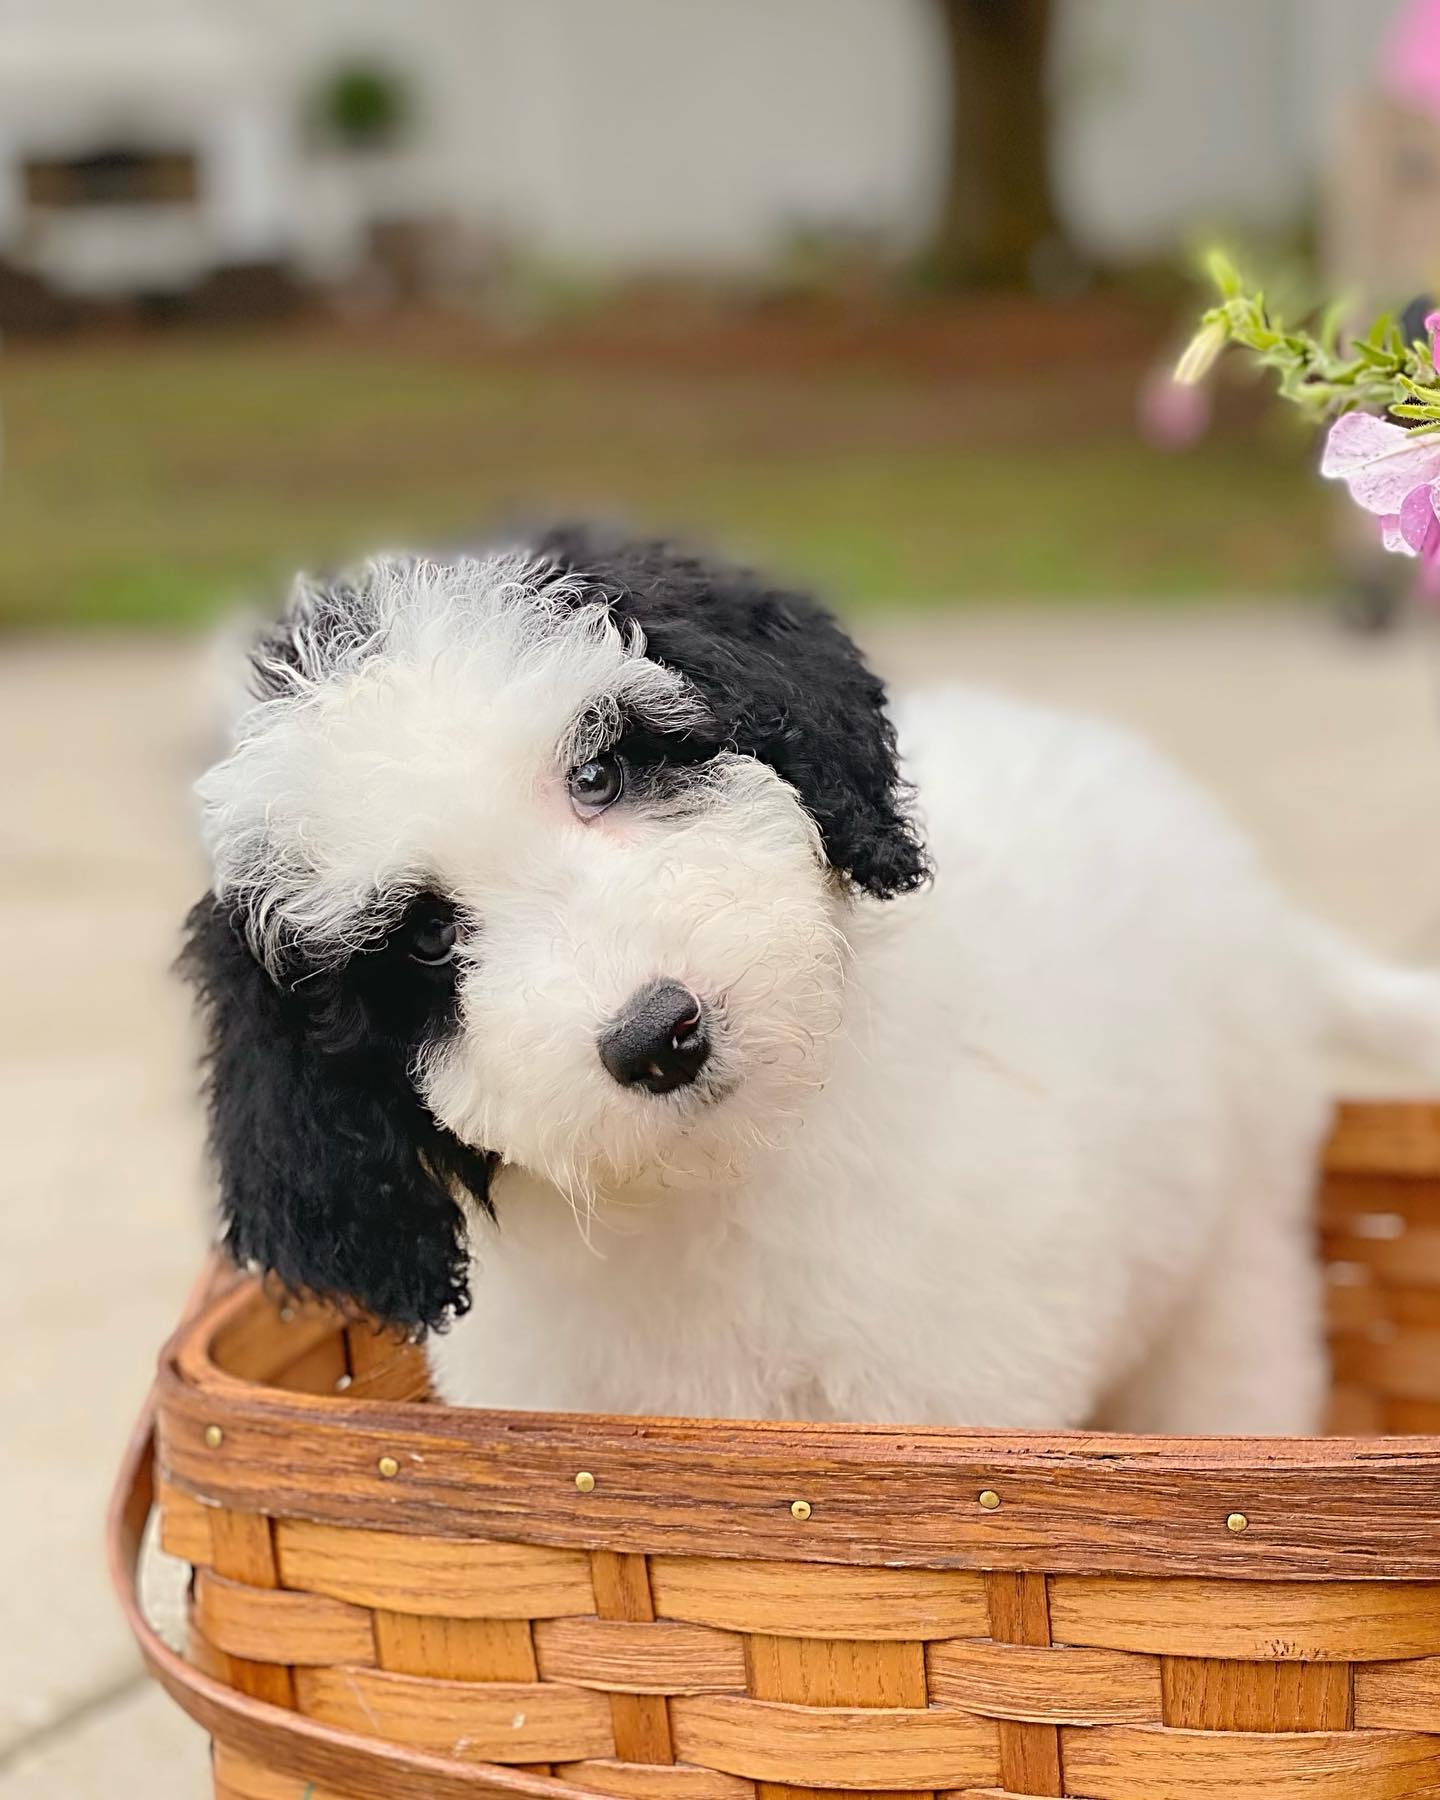 The black and white party golden doodle sitting in the basket is a cute and cuddly sight. This dog is obviously enjoying its time at the party, and its soft fur makes it a perfect candidate for a pet.